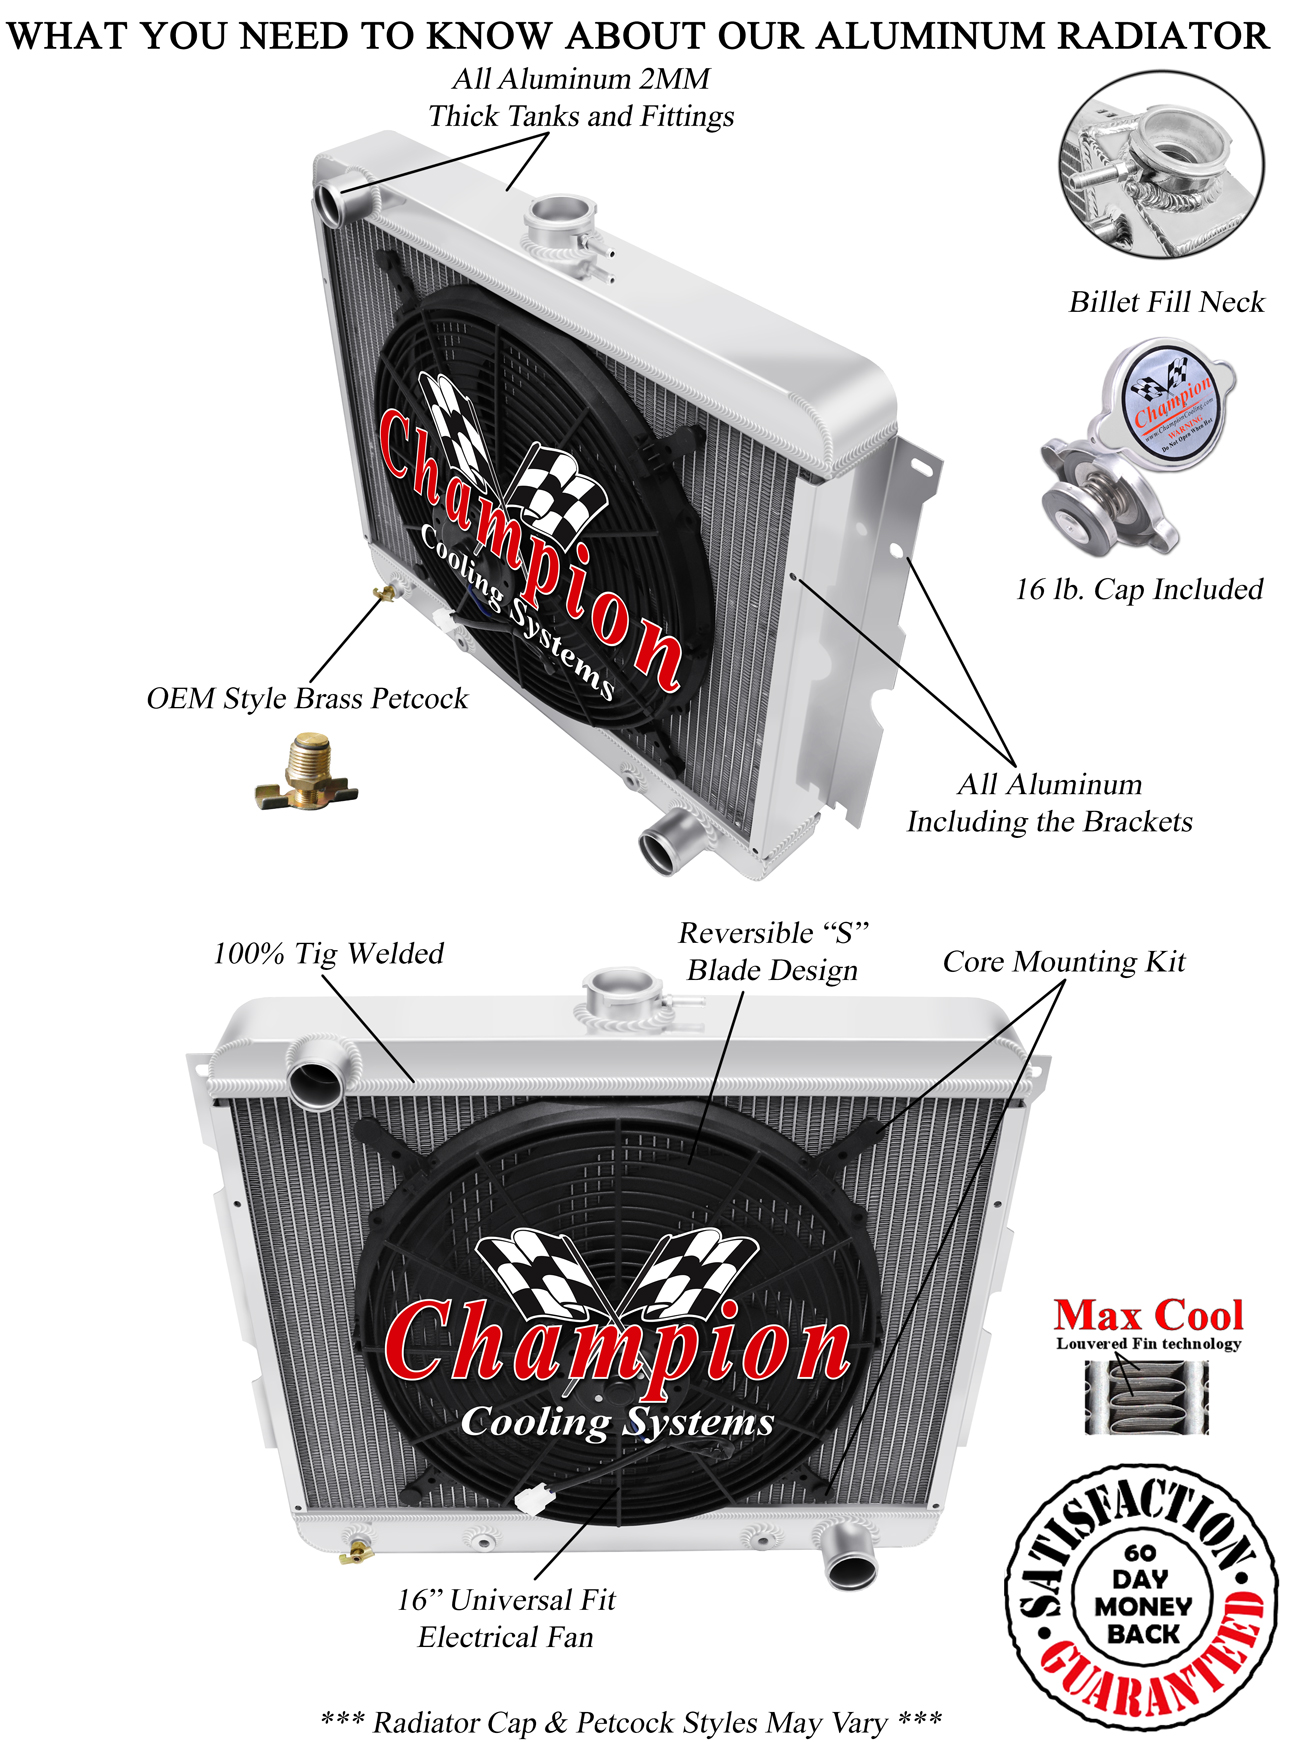 https://www.championcooling.com/photos/Photos%20White/With%20Fans/Combos/2374/16/2374_1f_d_w.jpg